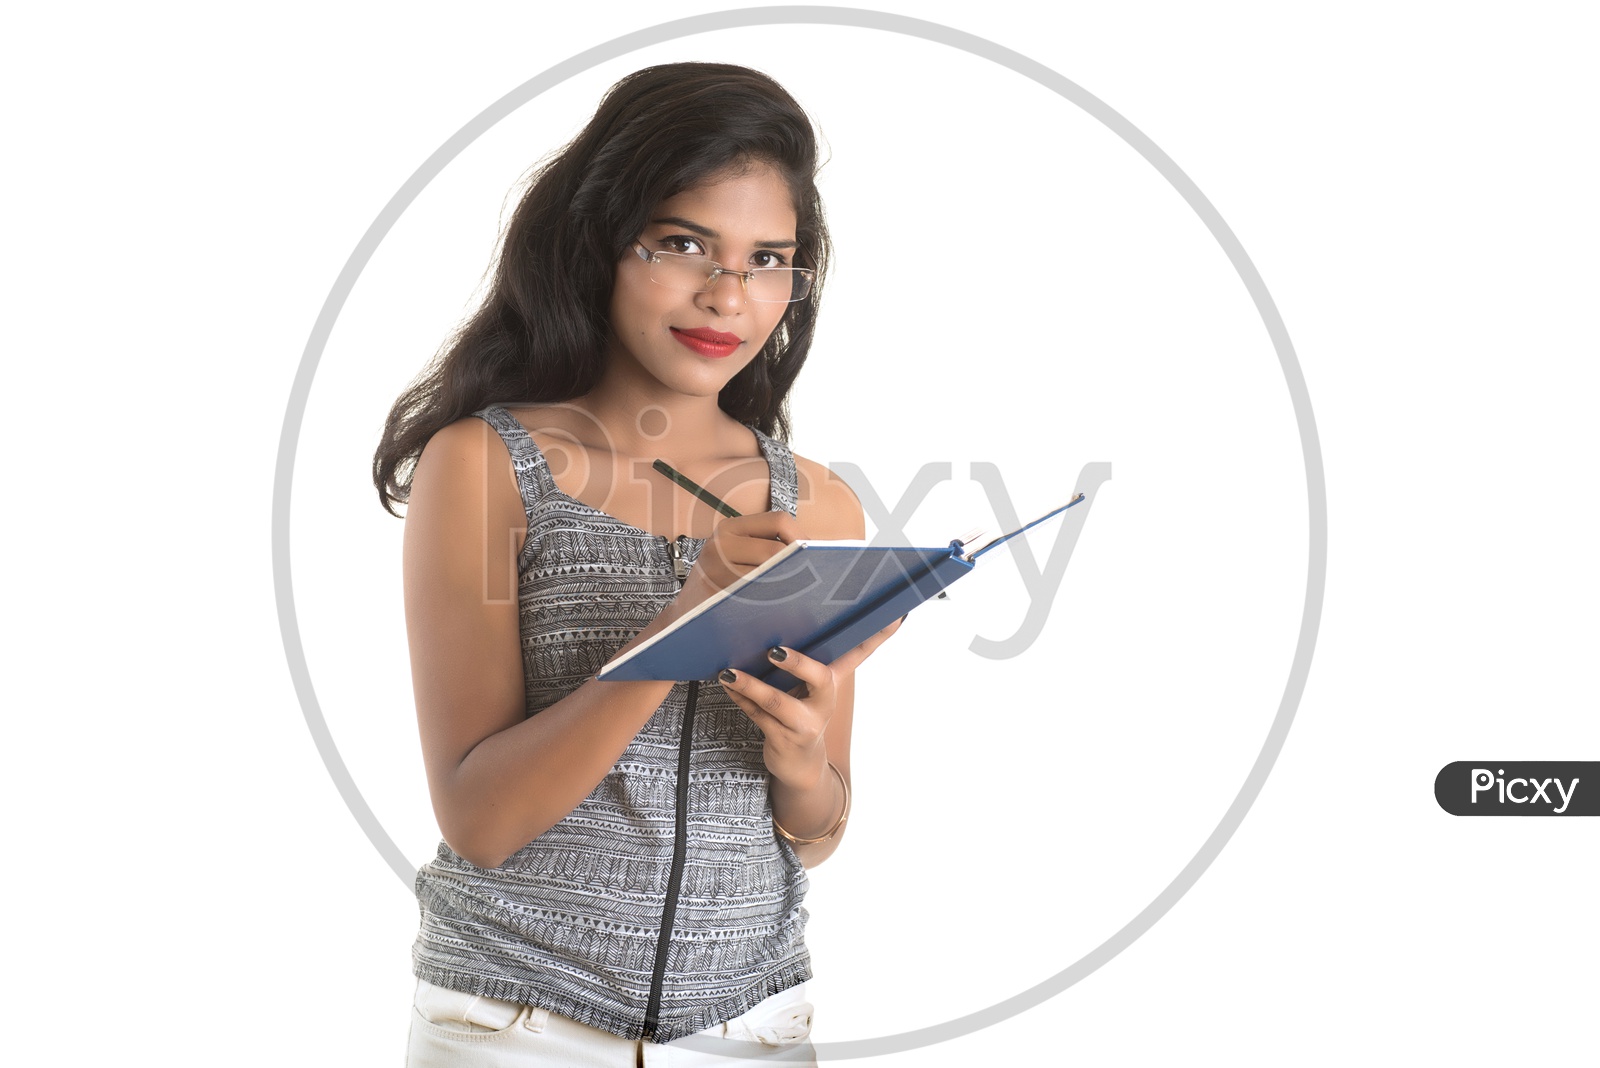 Pretty Young Girl Holding an Open Book In Hand And Posing On an Isolated White Background